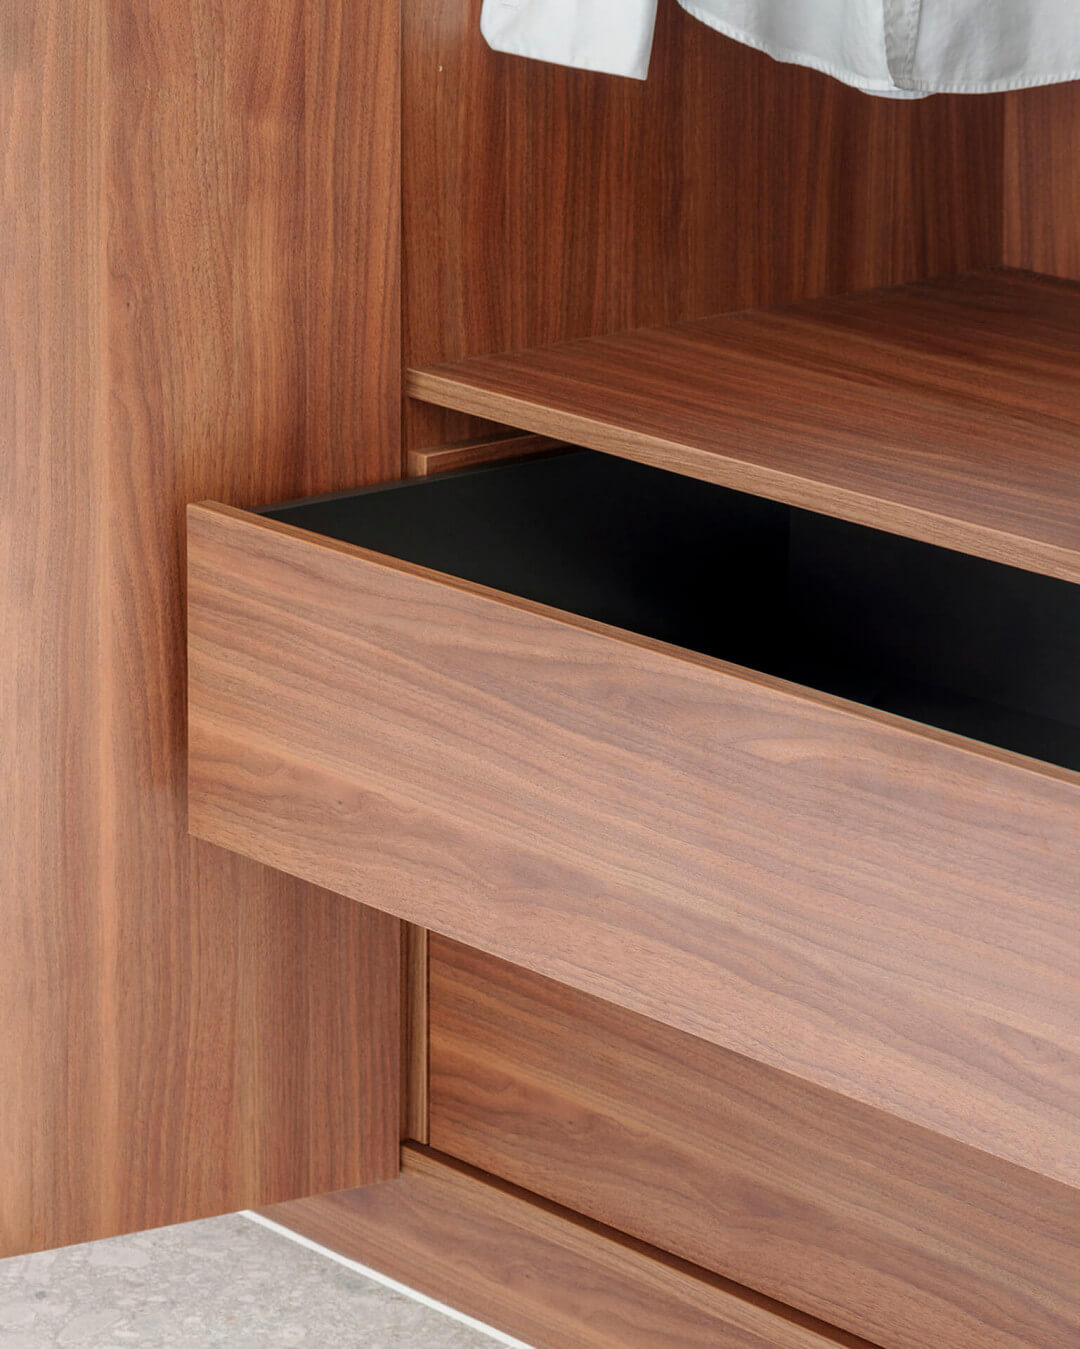 Detail of a self-closing Ta'Or Box drawer, with black interior and drawer front in Lorenzo Walnut wood shade.